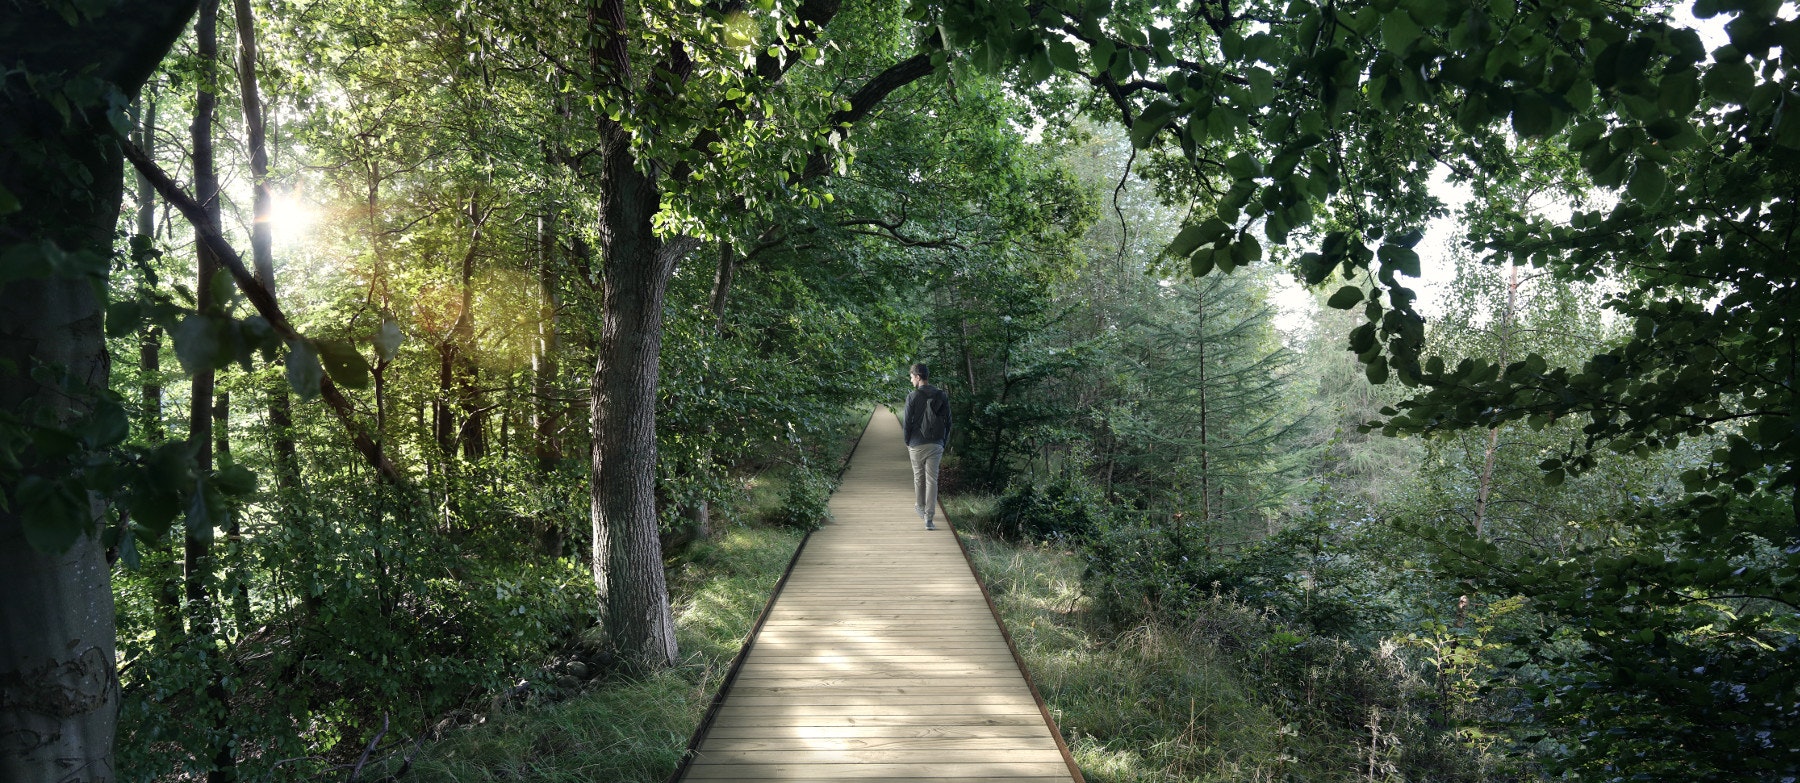 The tree walkway is designed to blend into the natural surroundings. Image by EFFEKT